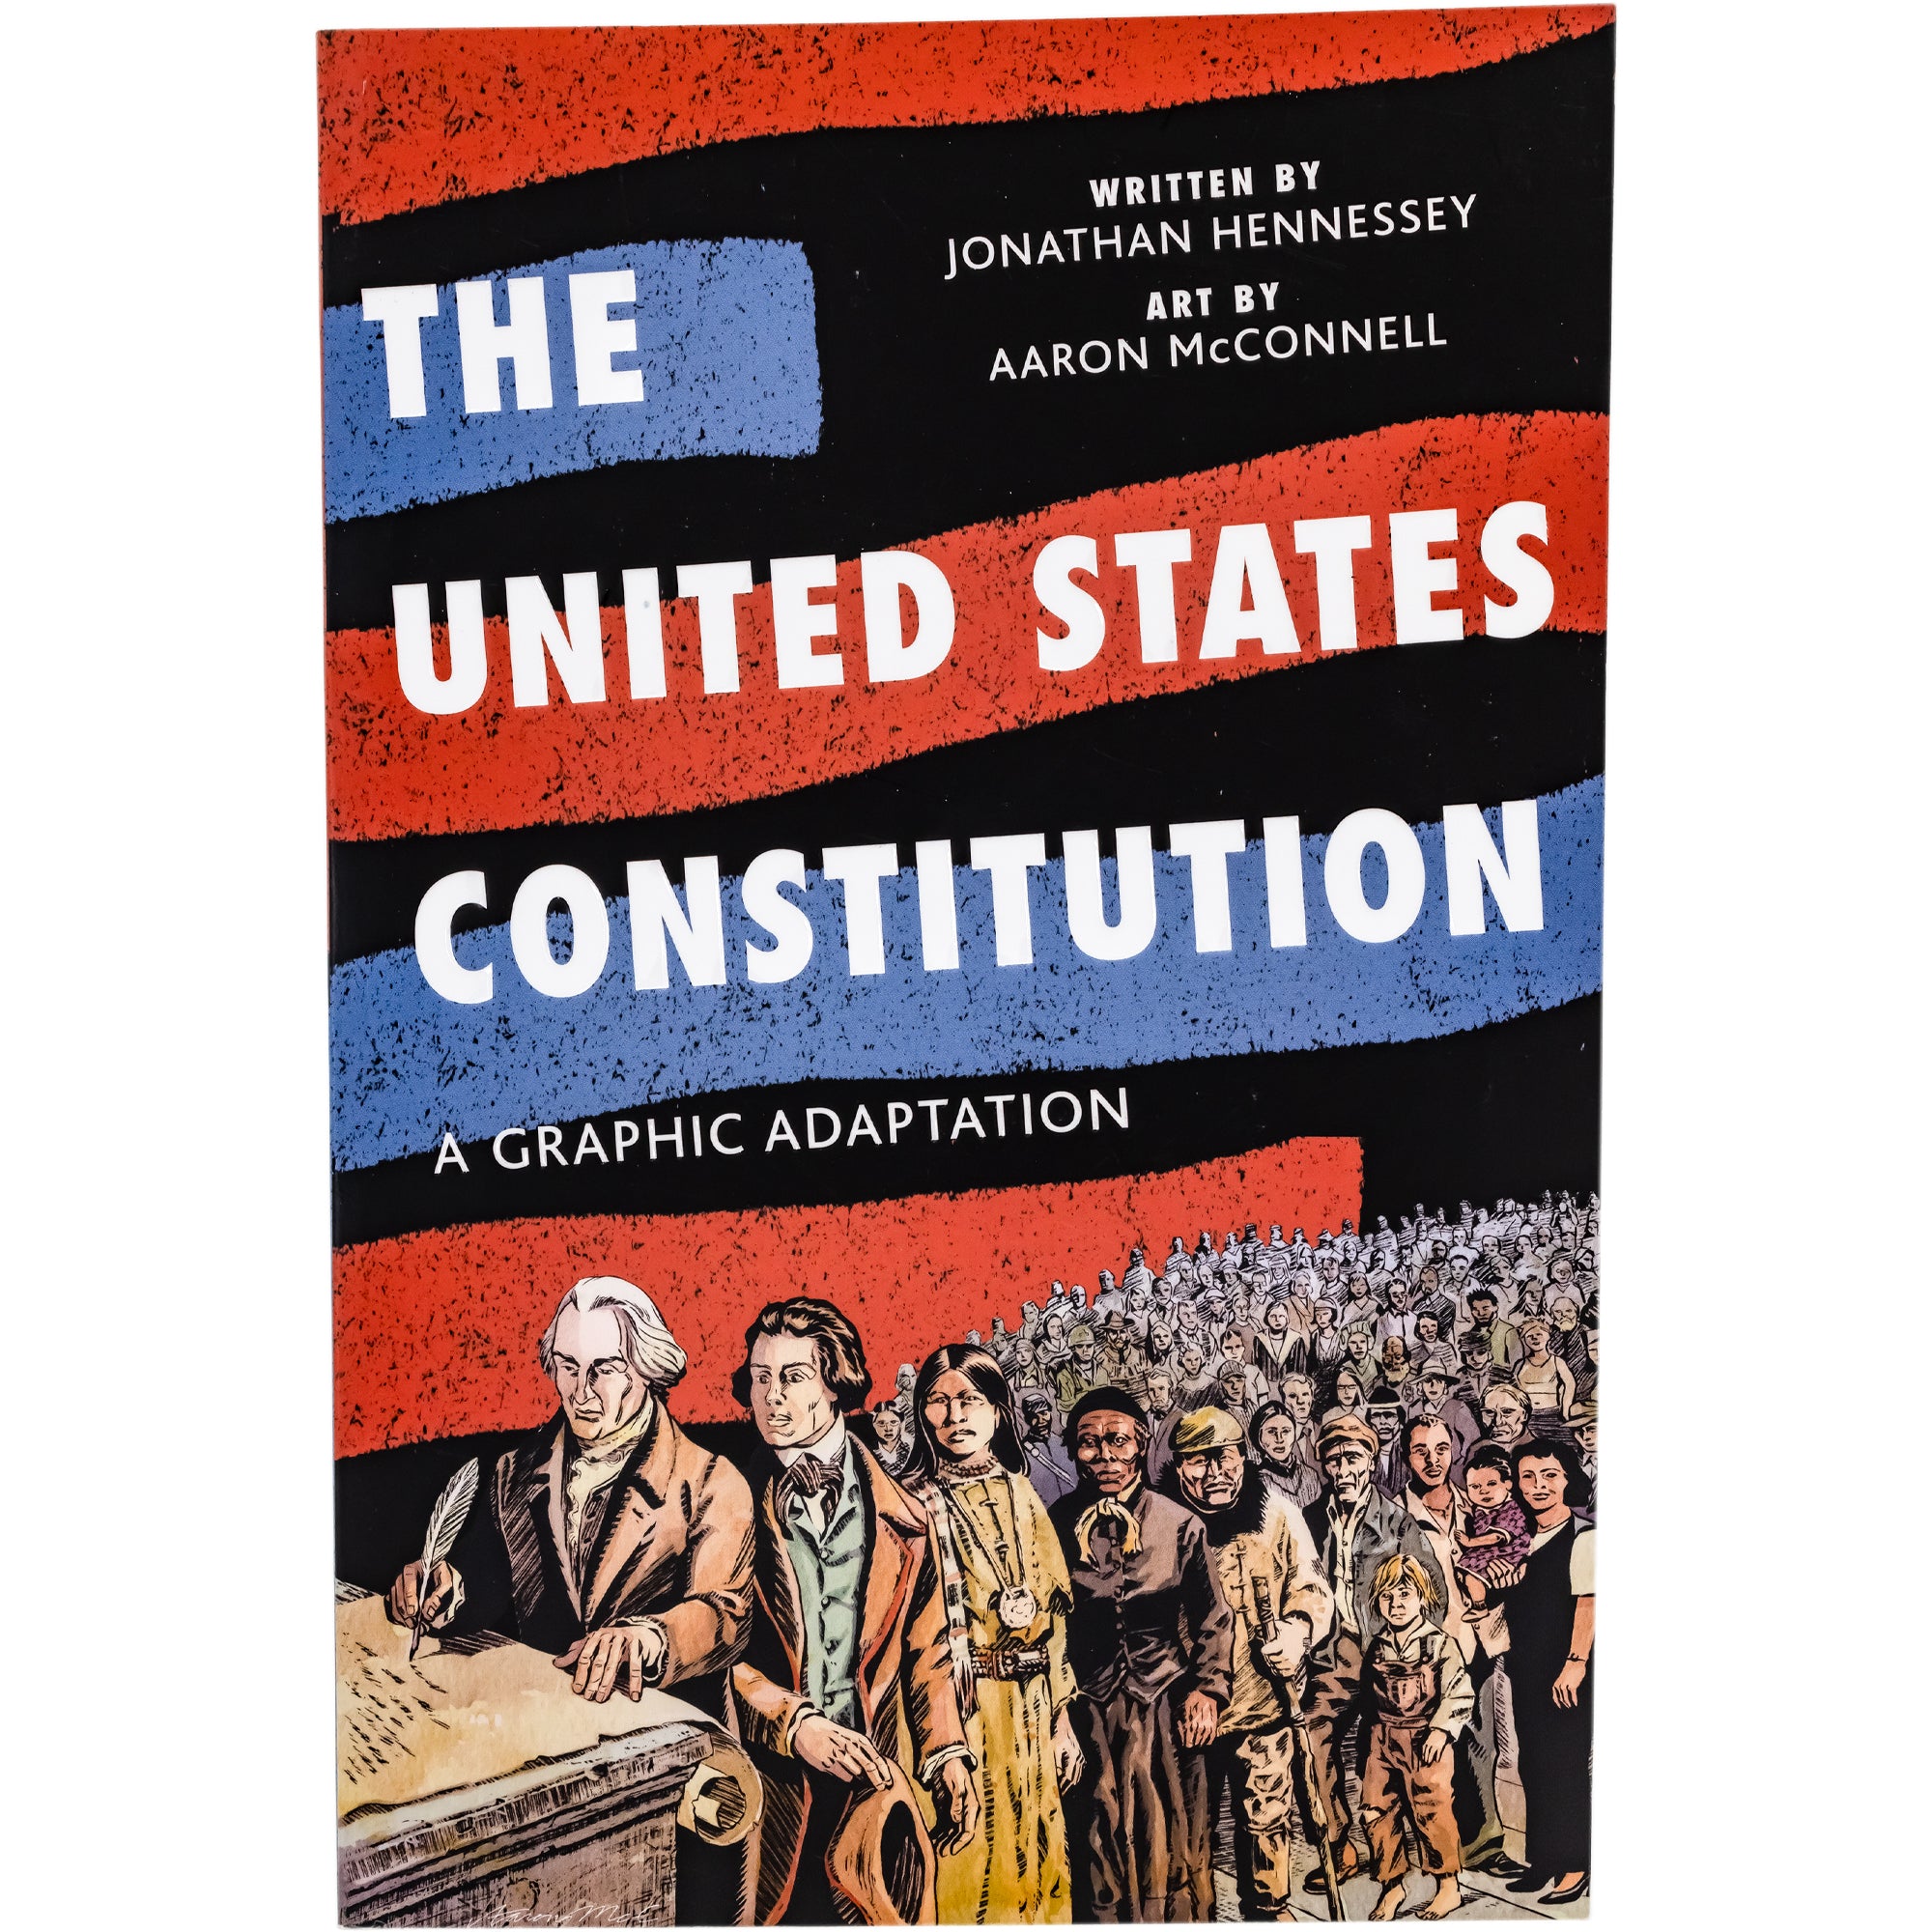 The United States Constitution book cover. The background is black with large red and blue highlights across the page. The title text is written in white across the top and middle. The bottom has an illustration of a man signing the constitution with a large crowd lined up behind him. The crowd includes men, women, and children of different ethnicities.